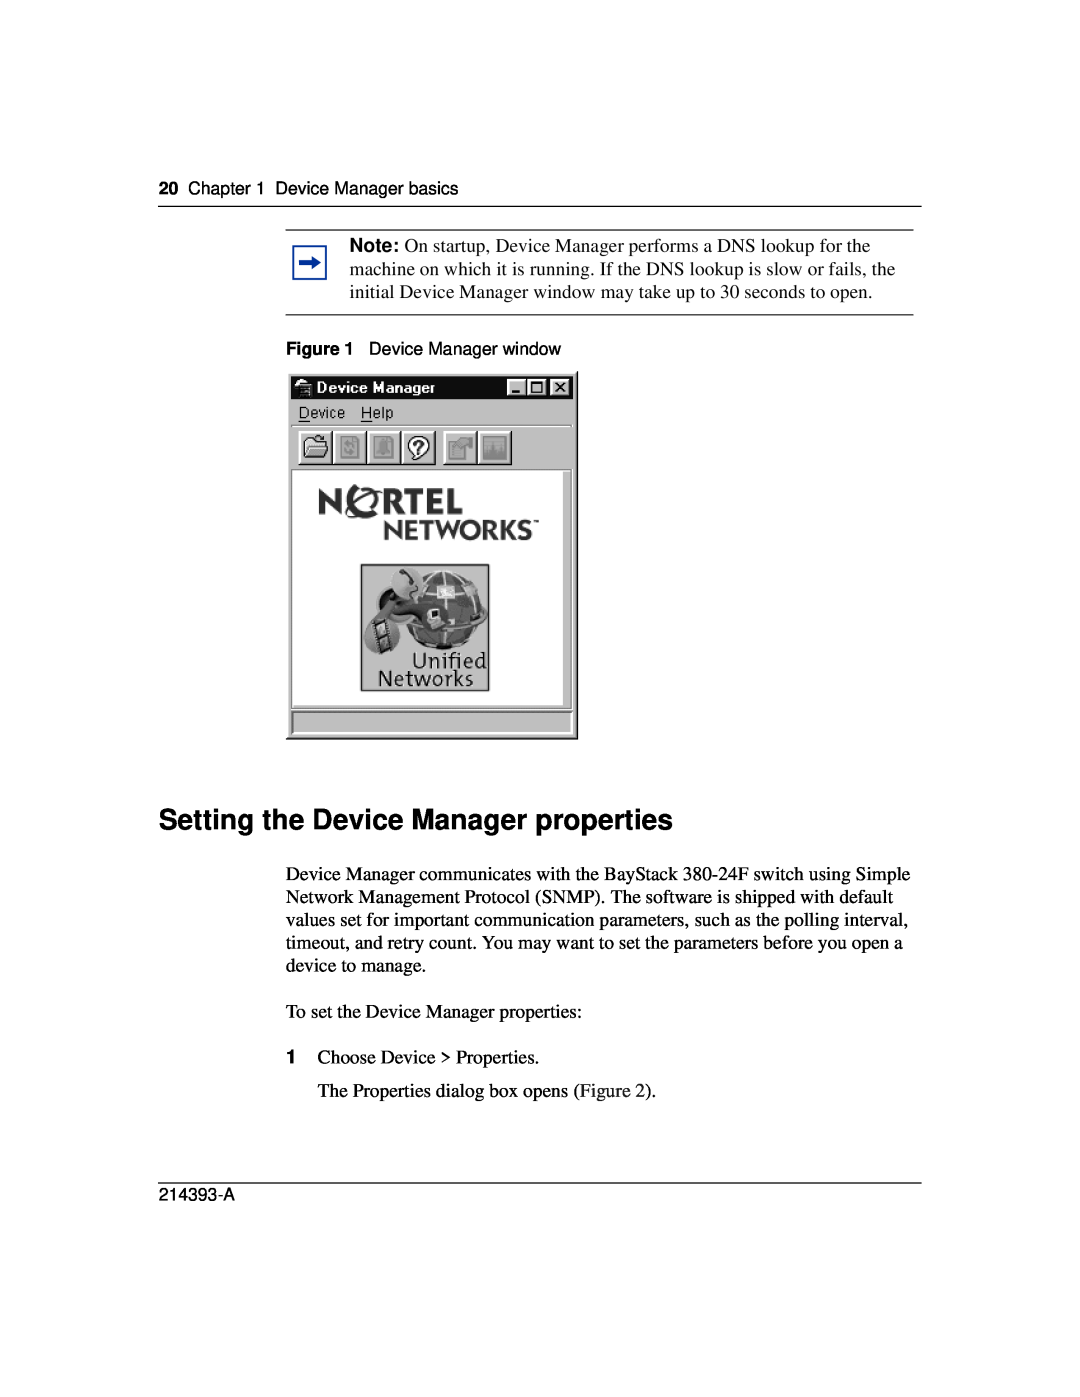 Nortel Networks 214393-A manual Setting the Device Manager properties 